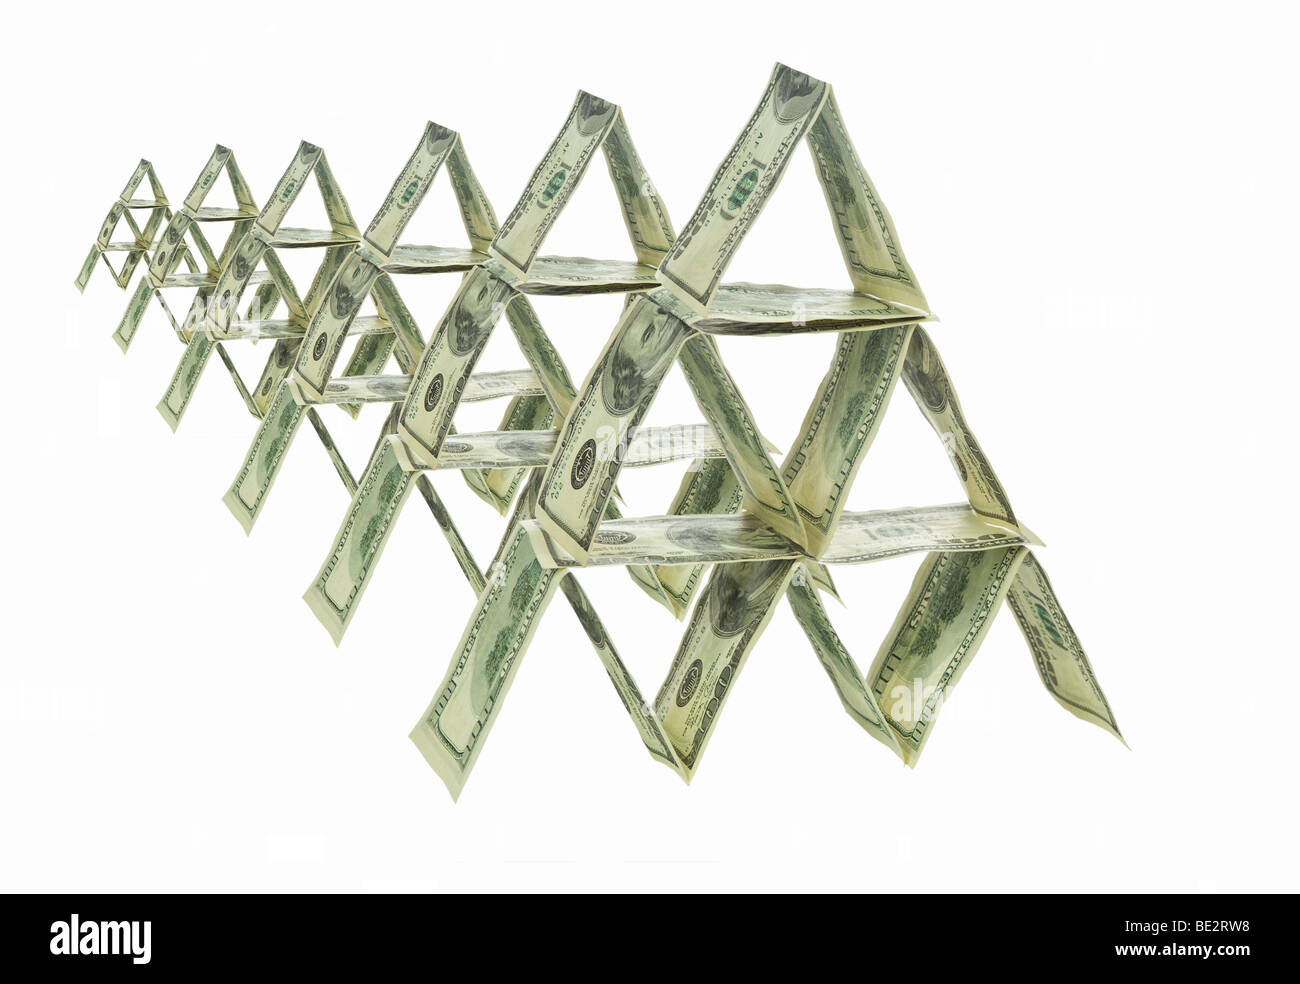 Six pyramids made out of one hundred dollar bills. Stock Photo